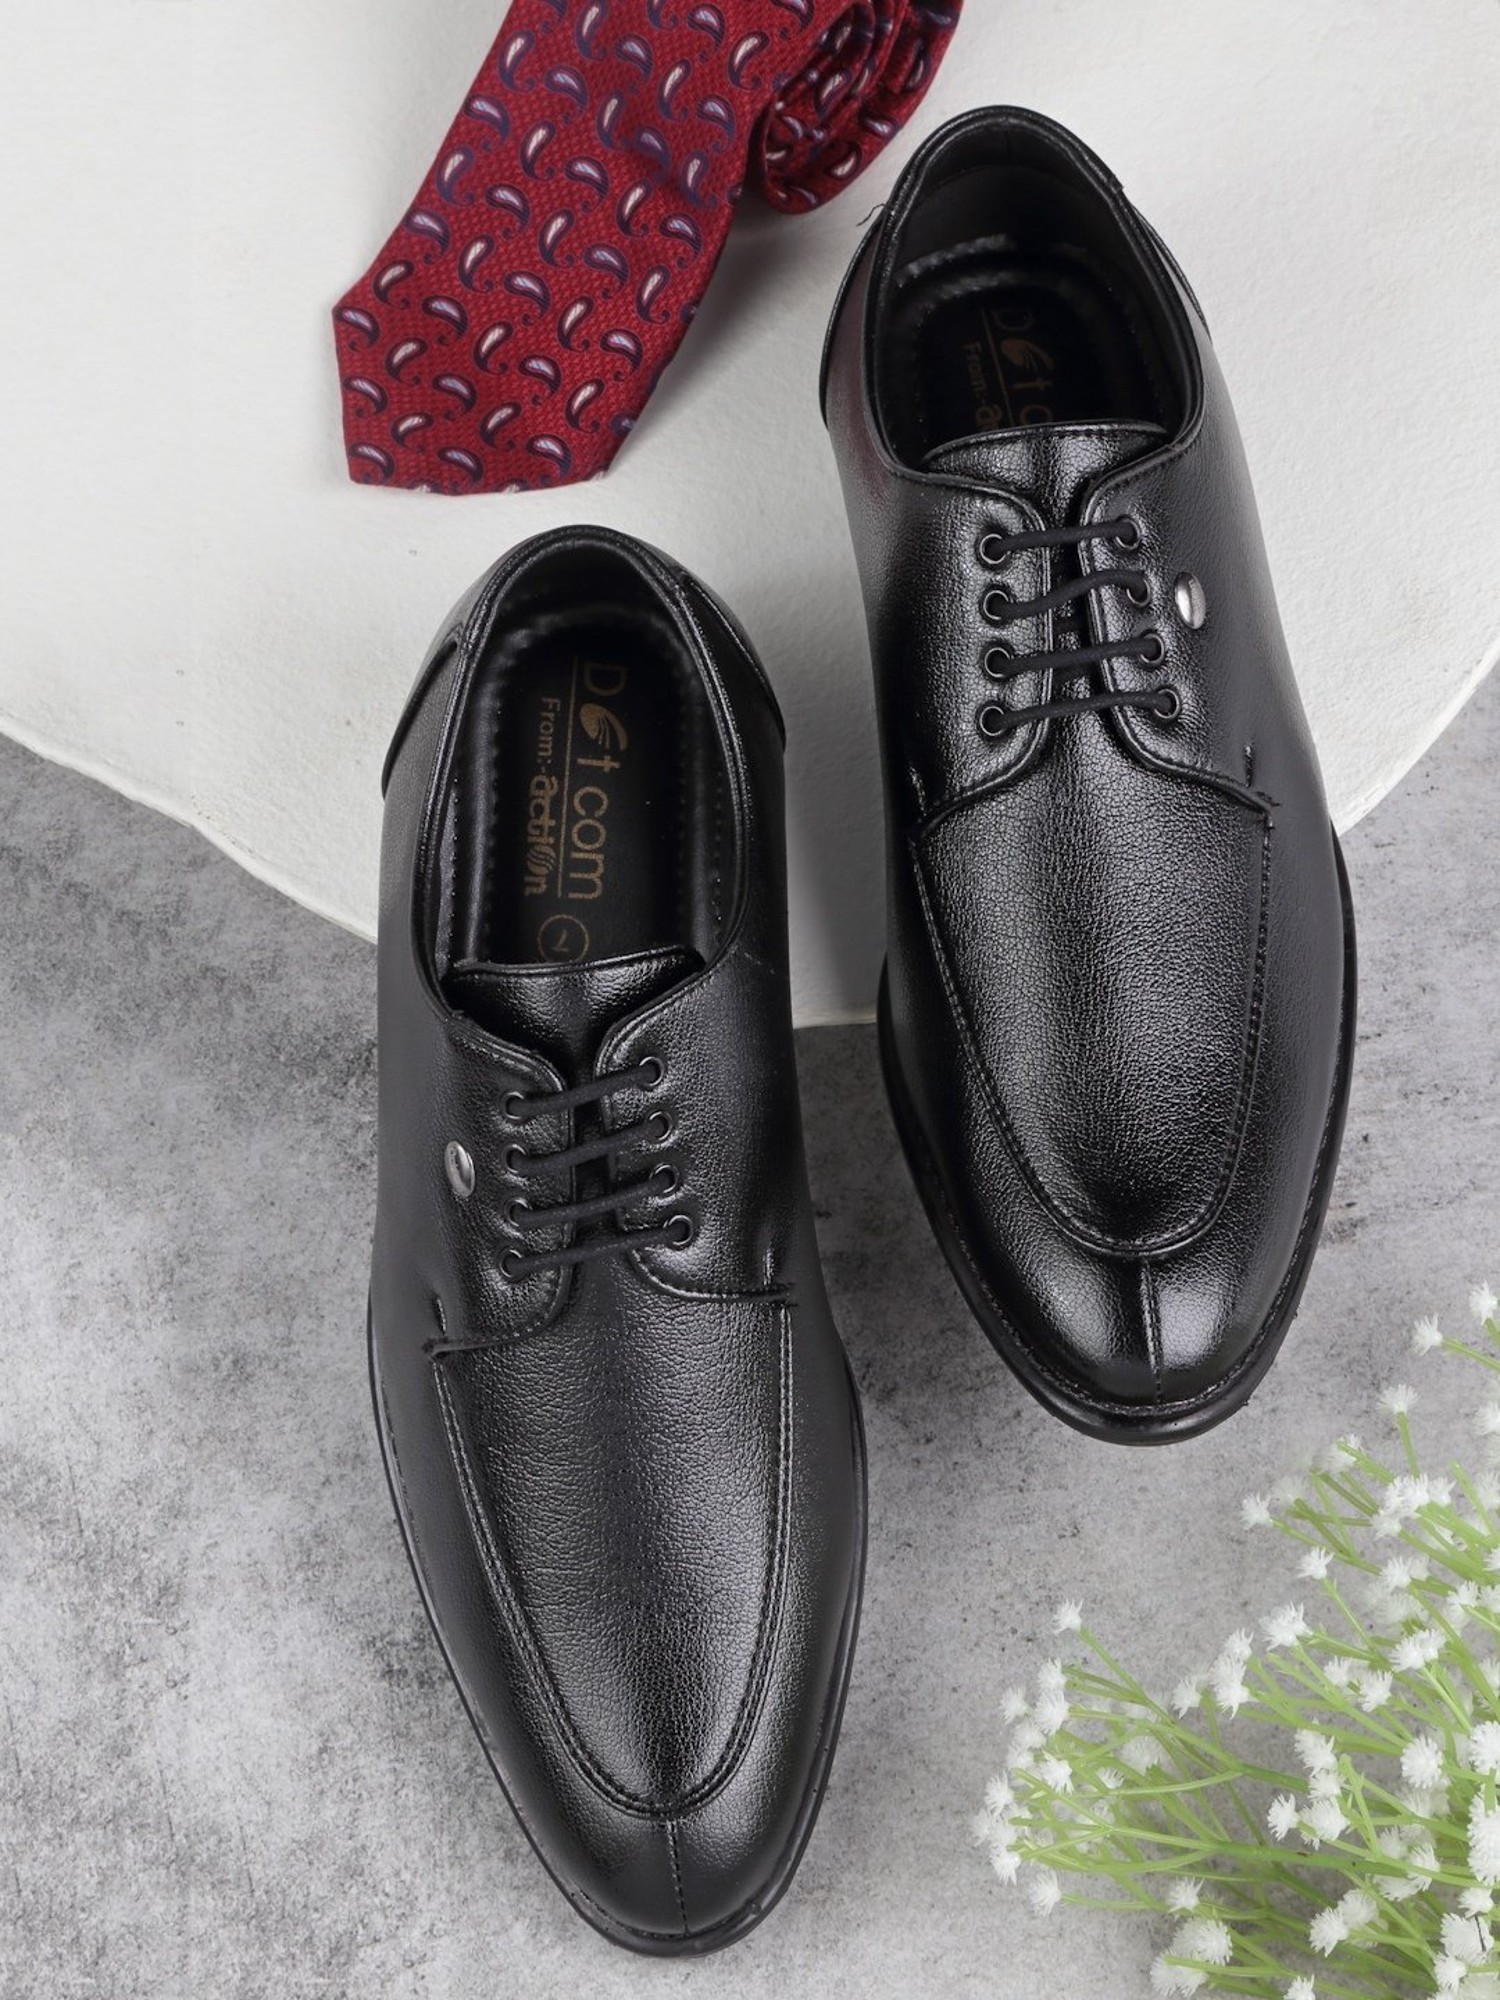 Business Casual Shoes Guide